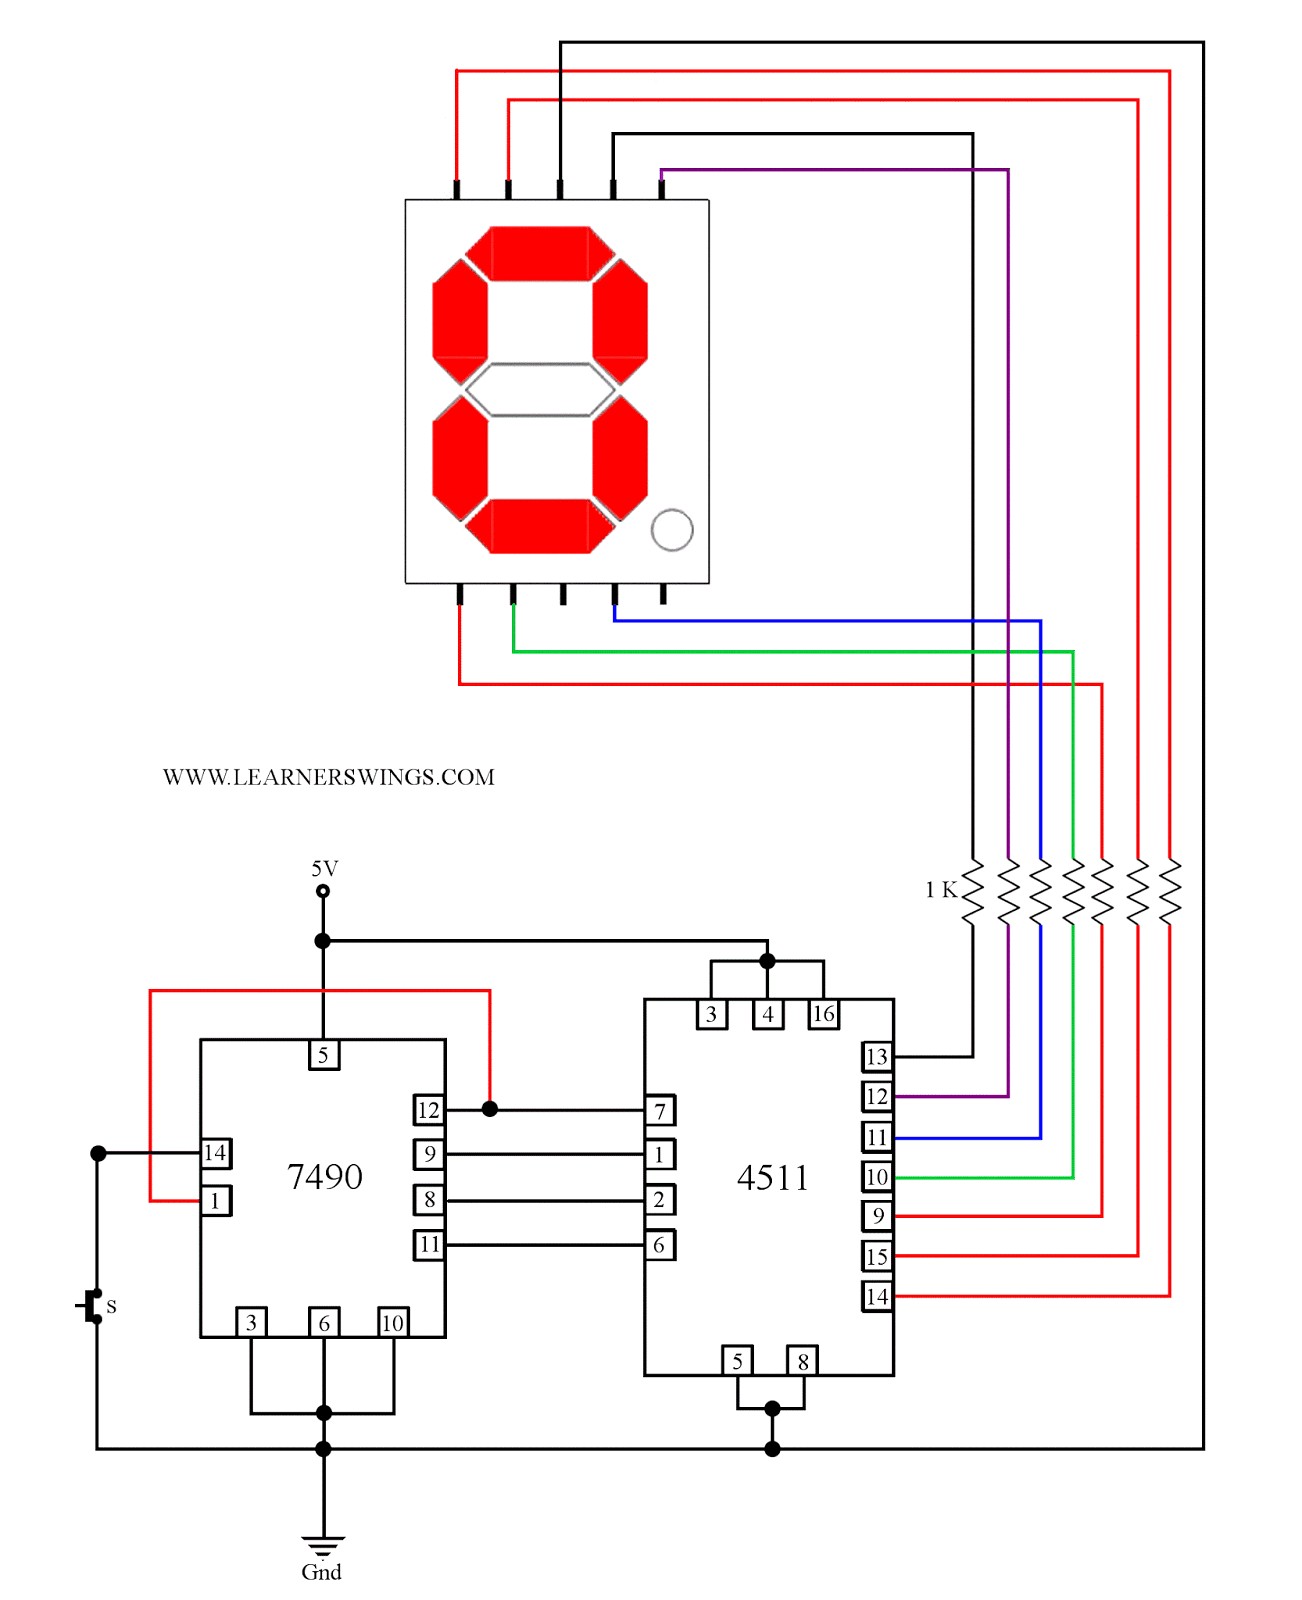 ponent Pin Out Timer Basics Ic Pinout Diagram Circuit To Control A Seven Segment Display By